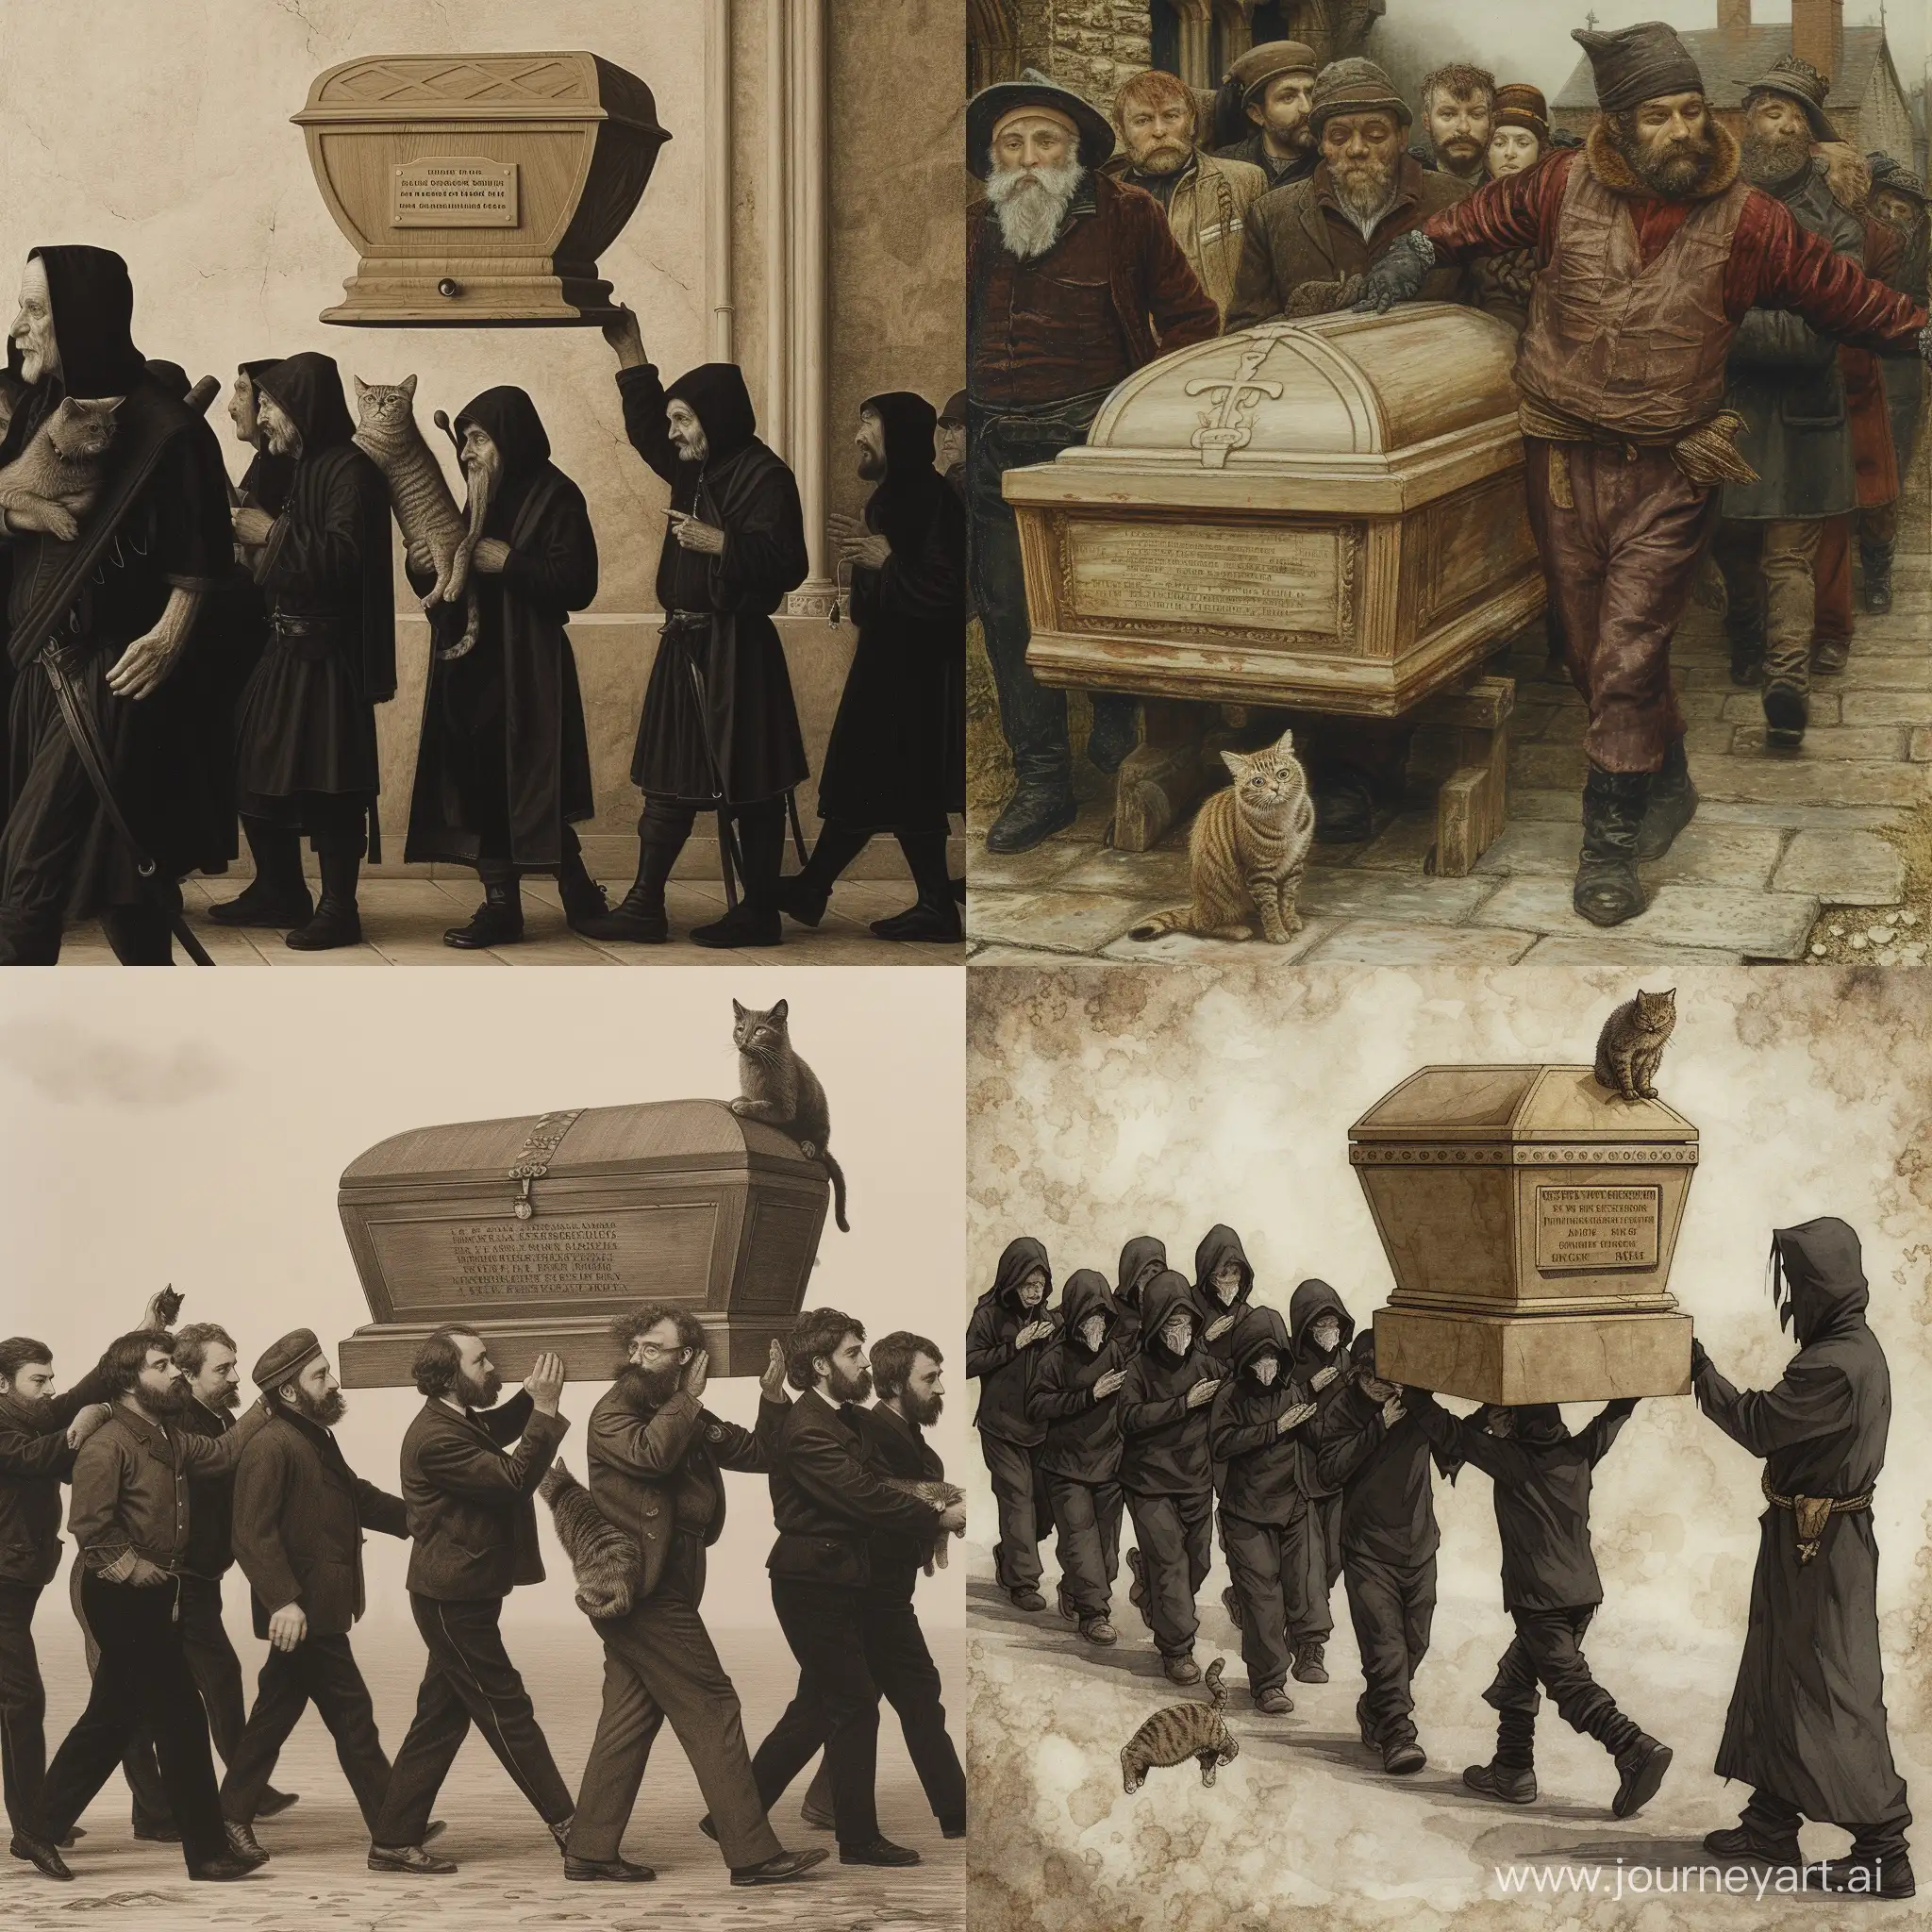 Image Prompt: A solemn funeral procession scene with mourners carrying a deceased person's sarcophagus, but a stern figure or inscription indicating the prohibition of a cat accompanying the deceased, with perhaps an image of a cat being separated from the procession.